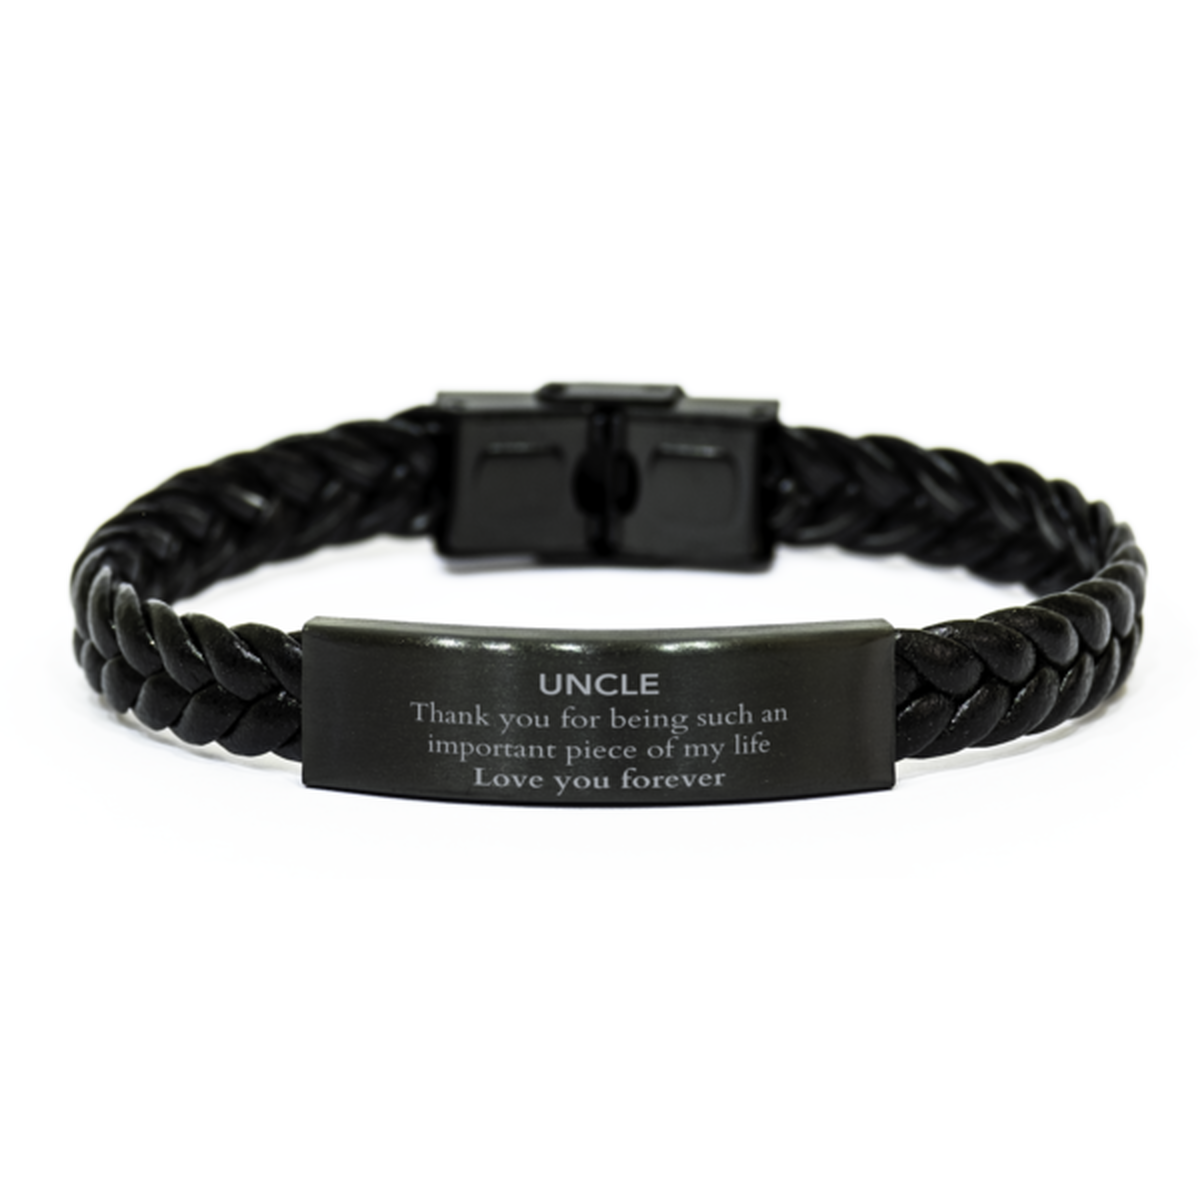 Appropriate Uncle Braided Leather Bracelet Epic Birthday Gifts for Uncle Thank you for being such an important piece of my life Uncle Christmas Mothers Fathers Day